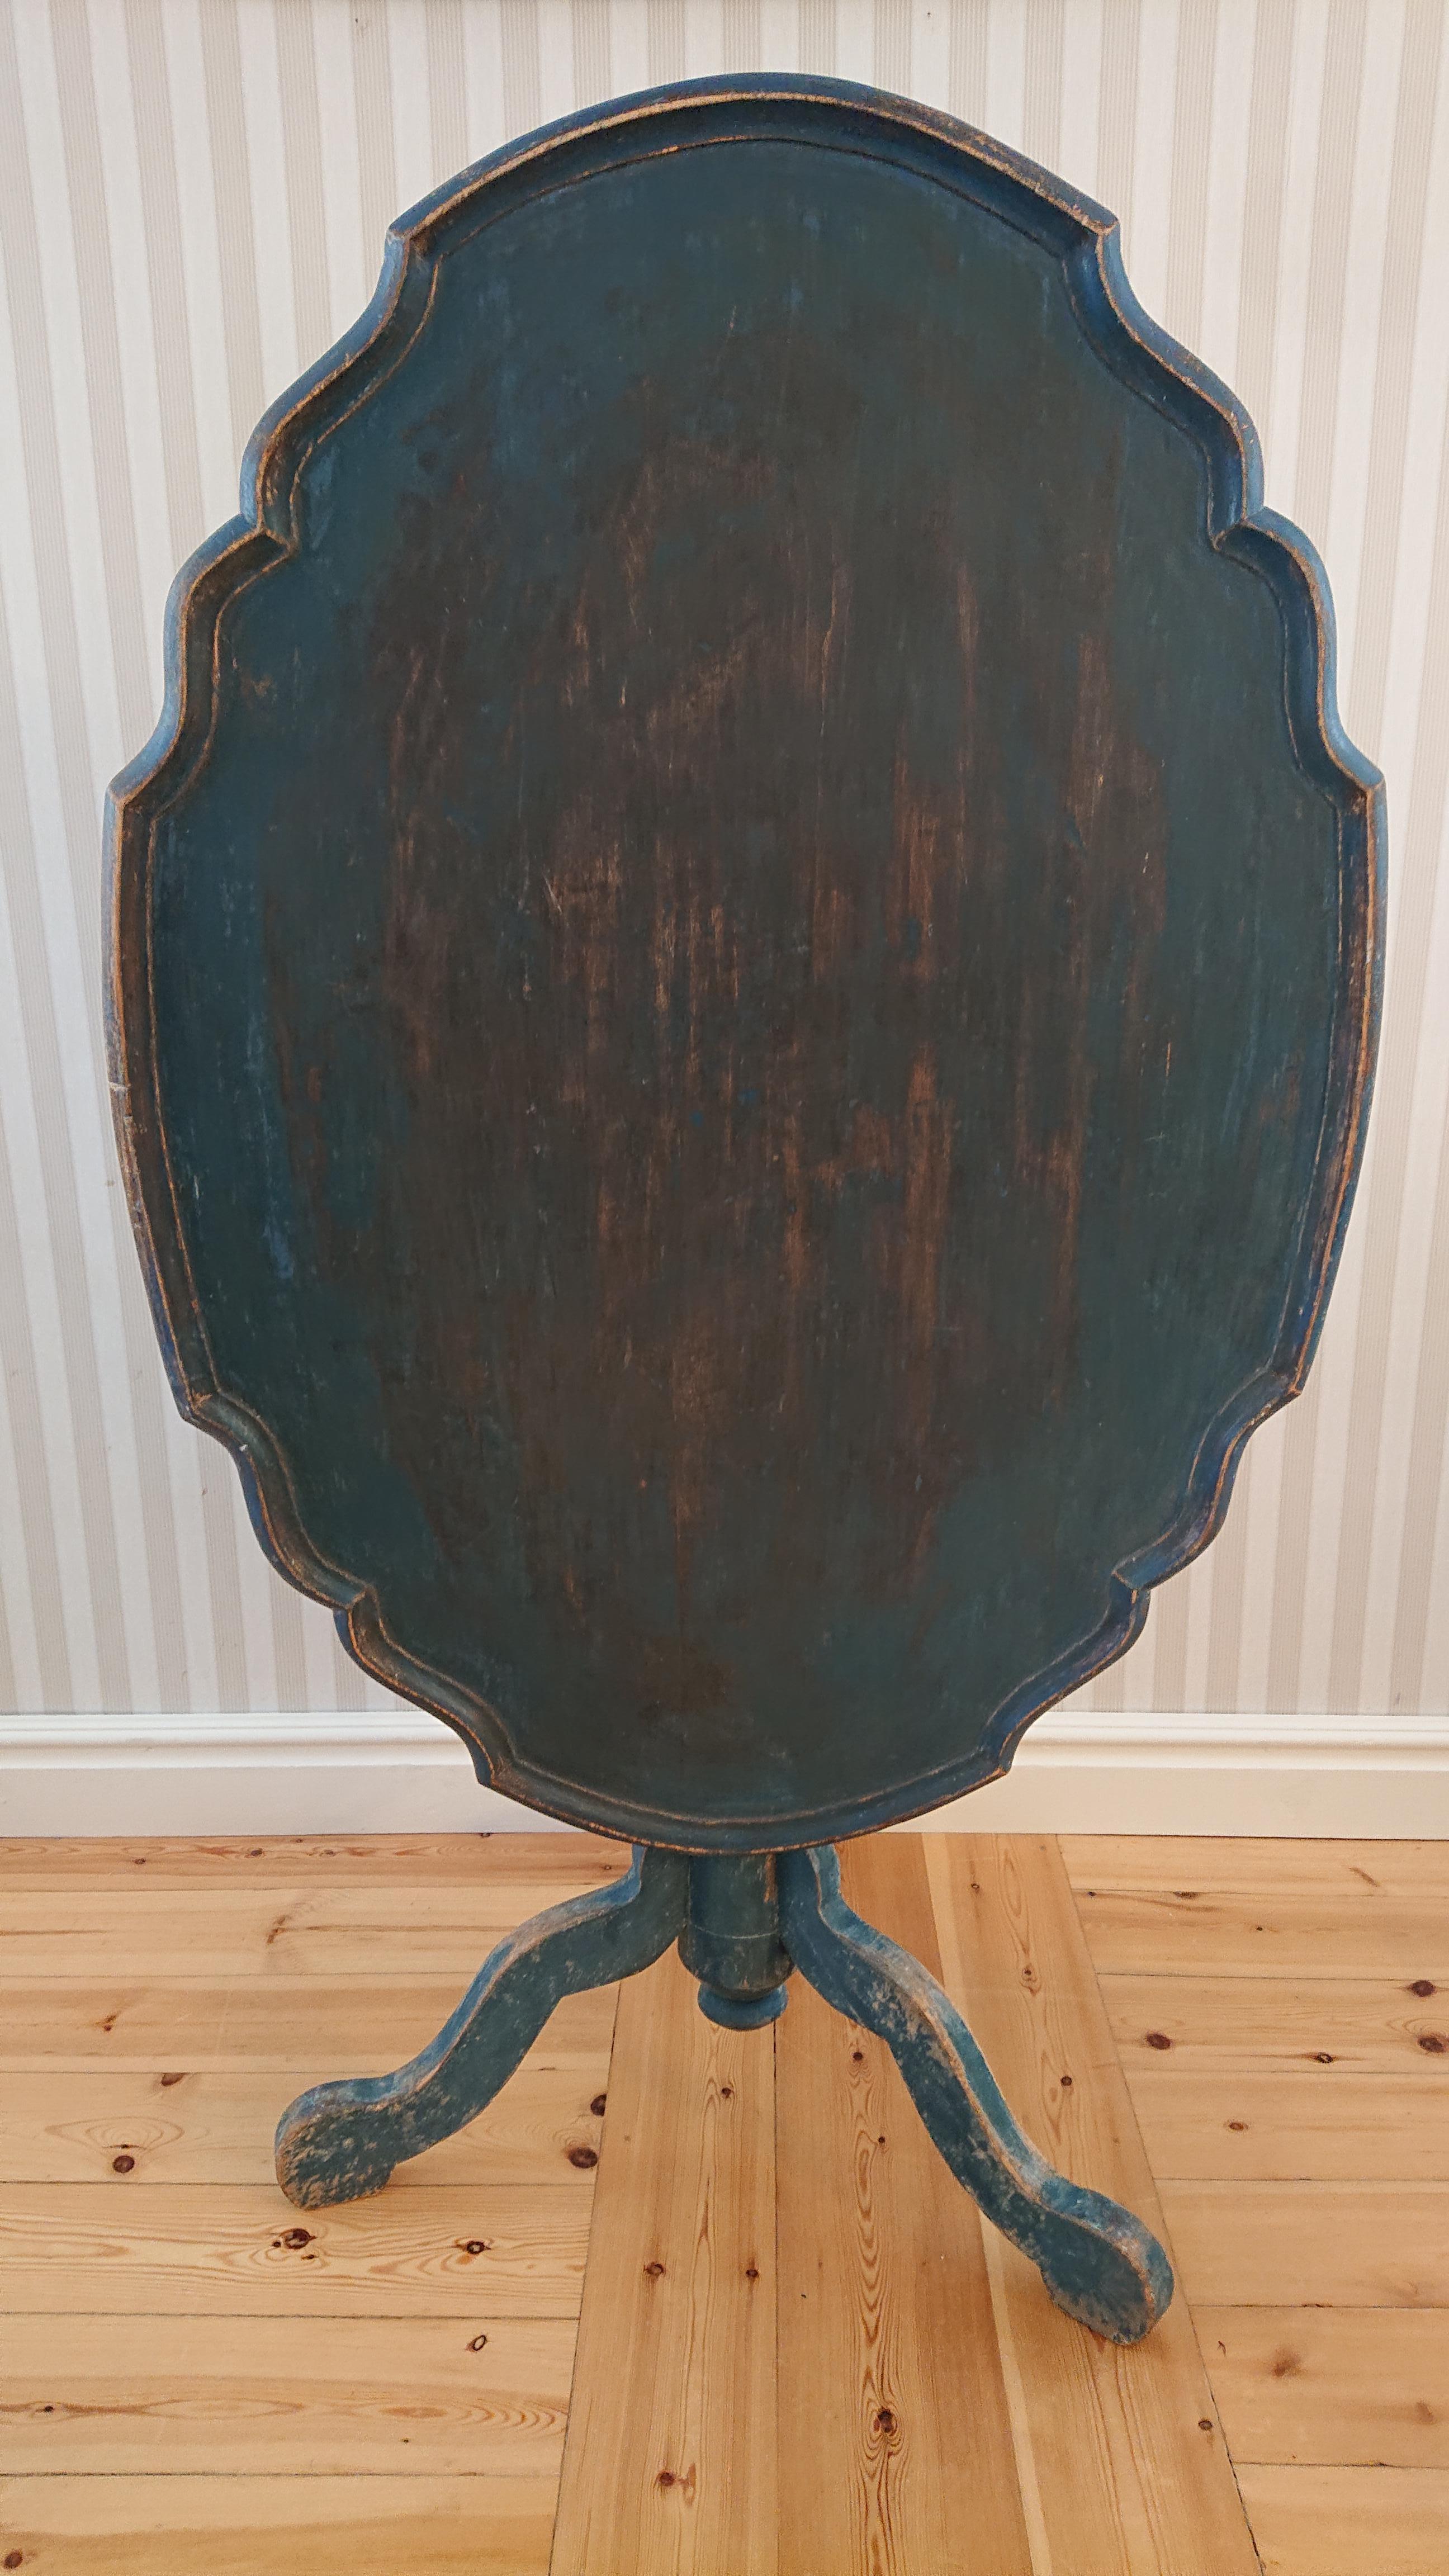 18th century Swedish Rococo tilt top table from Stockholm.
A fantastic fine table with high-class carpentry.
Beautifully shaped tabletop.
Small retouches on the top. 
The table legs have finely cut curved legs.
Scraped by hand to its well